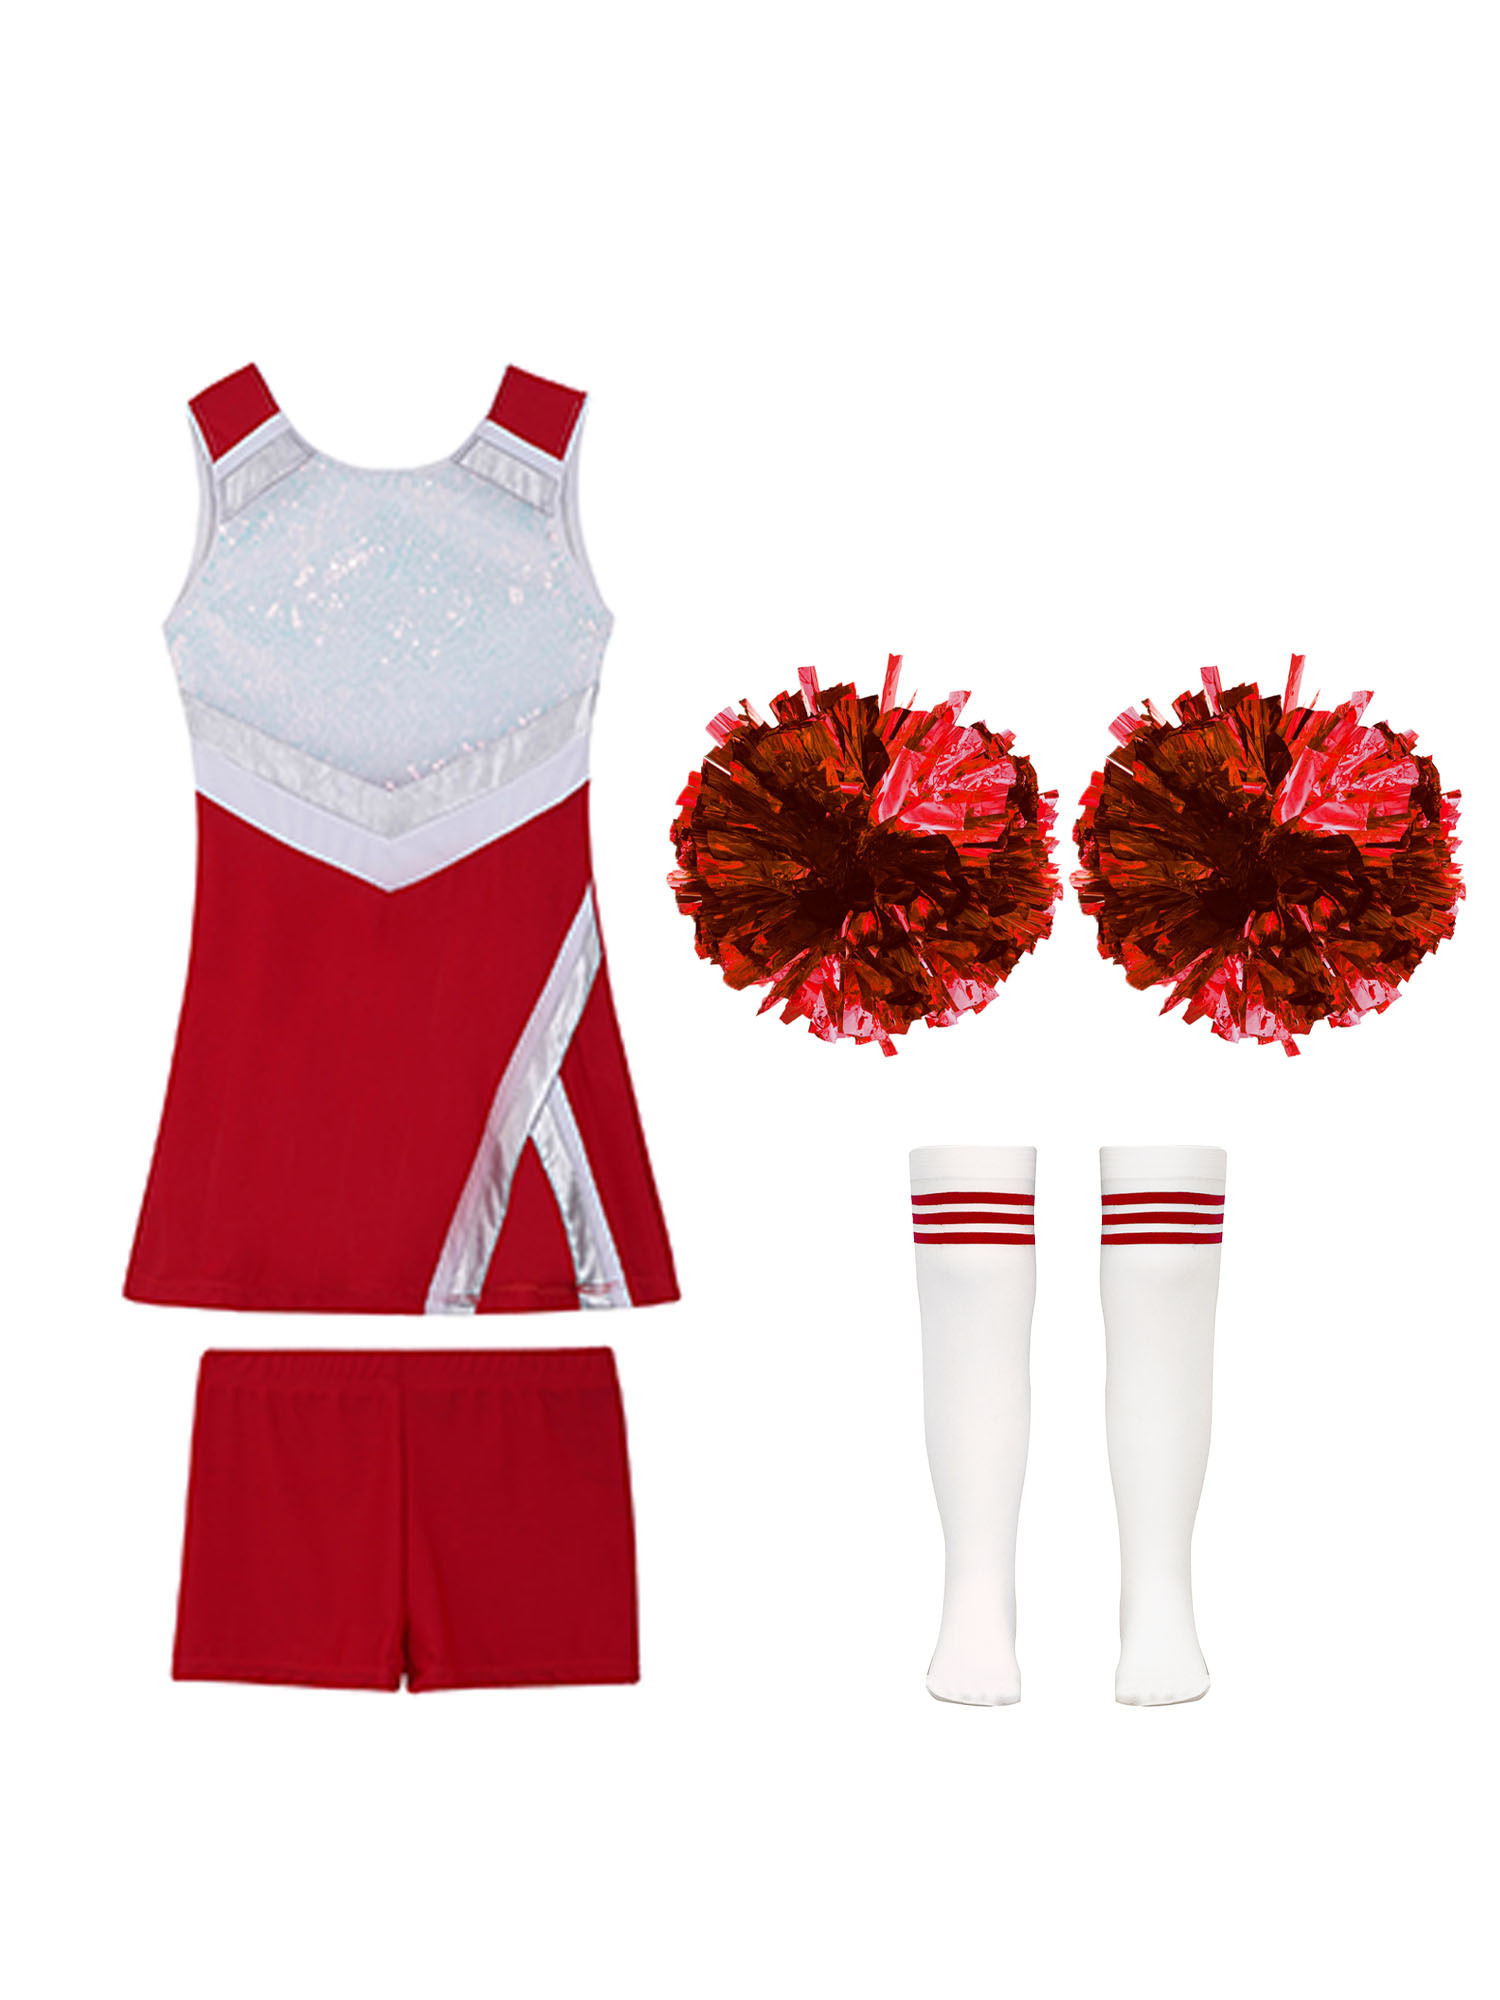 TiaoBug Kids Girls Cheer Leader Uniform Sports Games Cheerleading Dance Outfits Halloween Carnival Fancy Dress Up A Red-A 14 - image 3 of 5